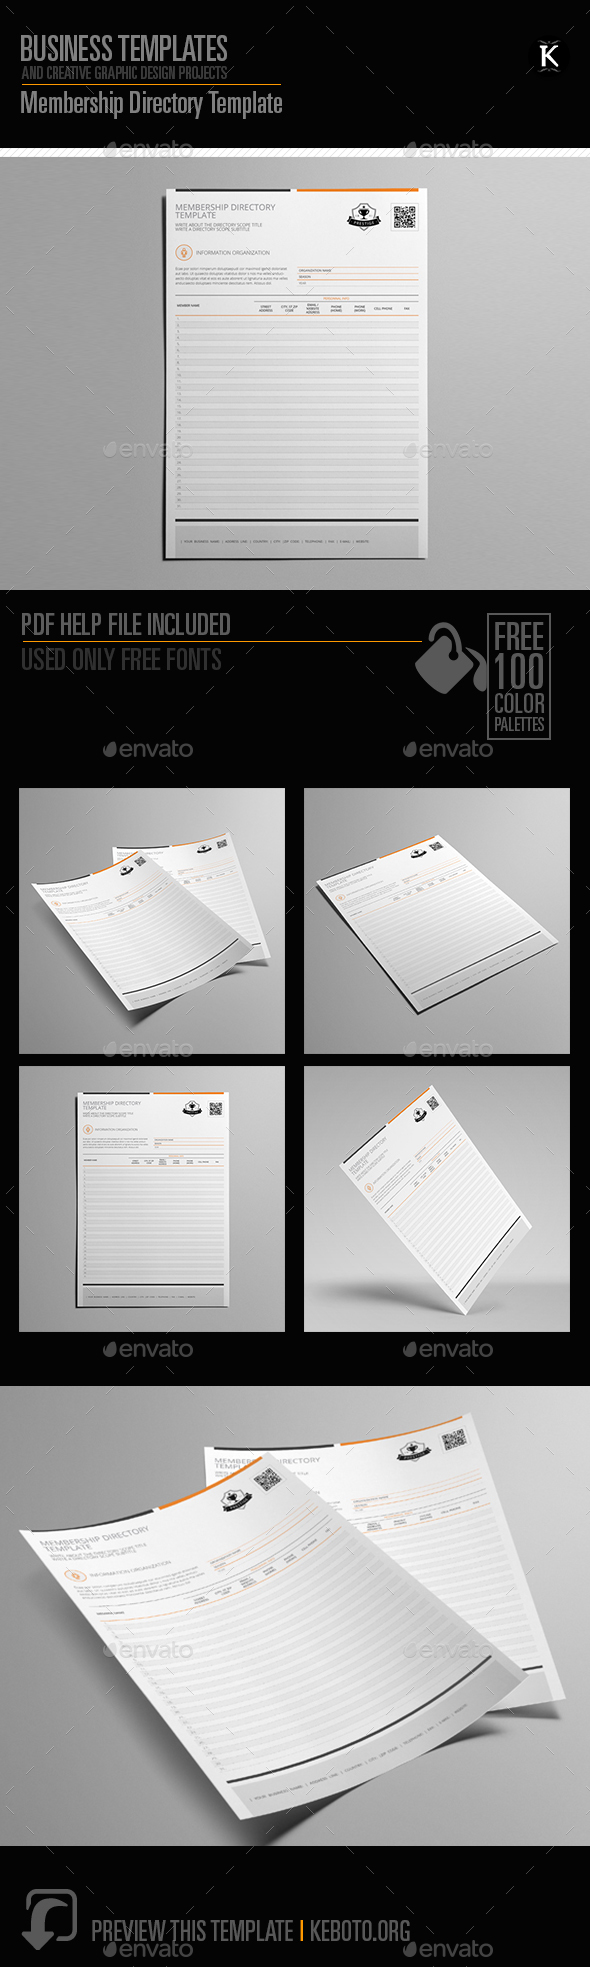 membership-directory-template-by-keboto-graphicriver